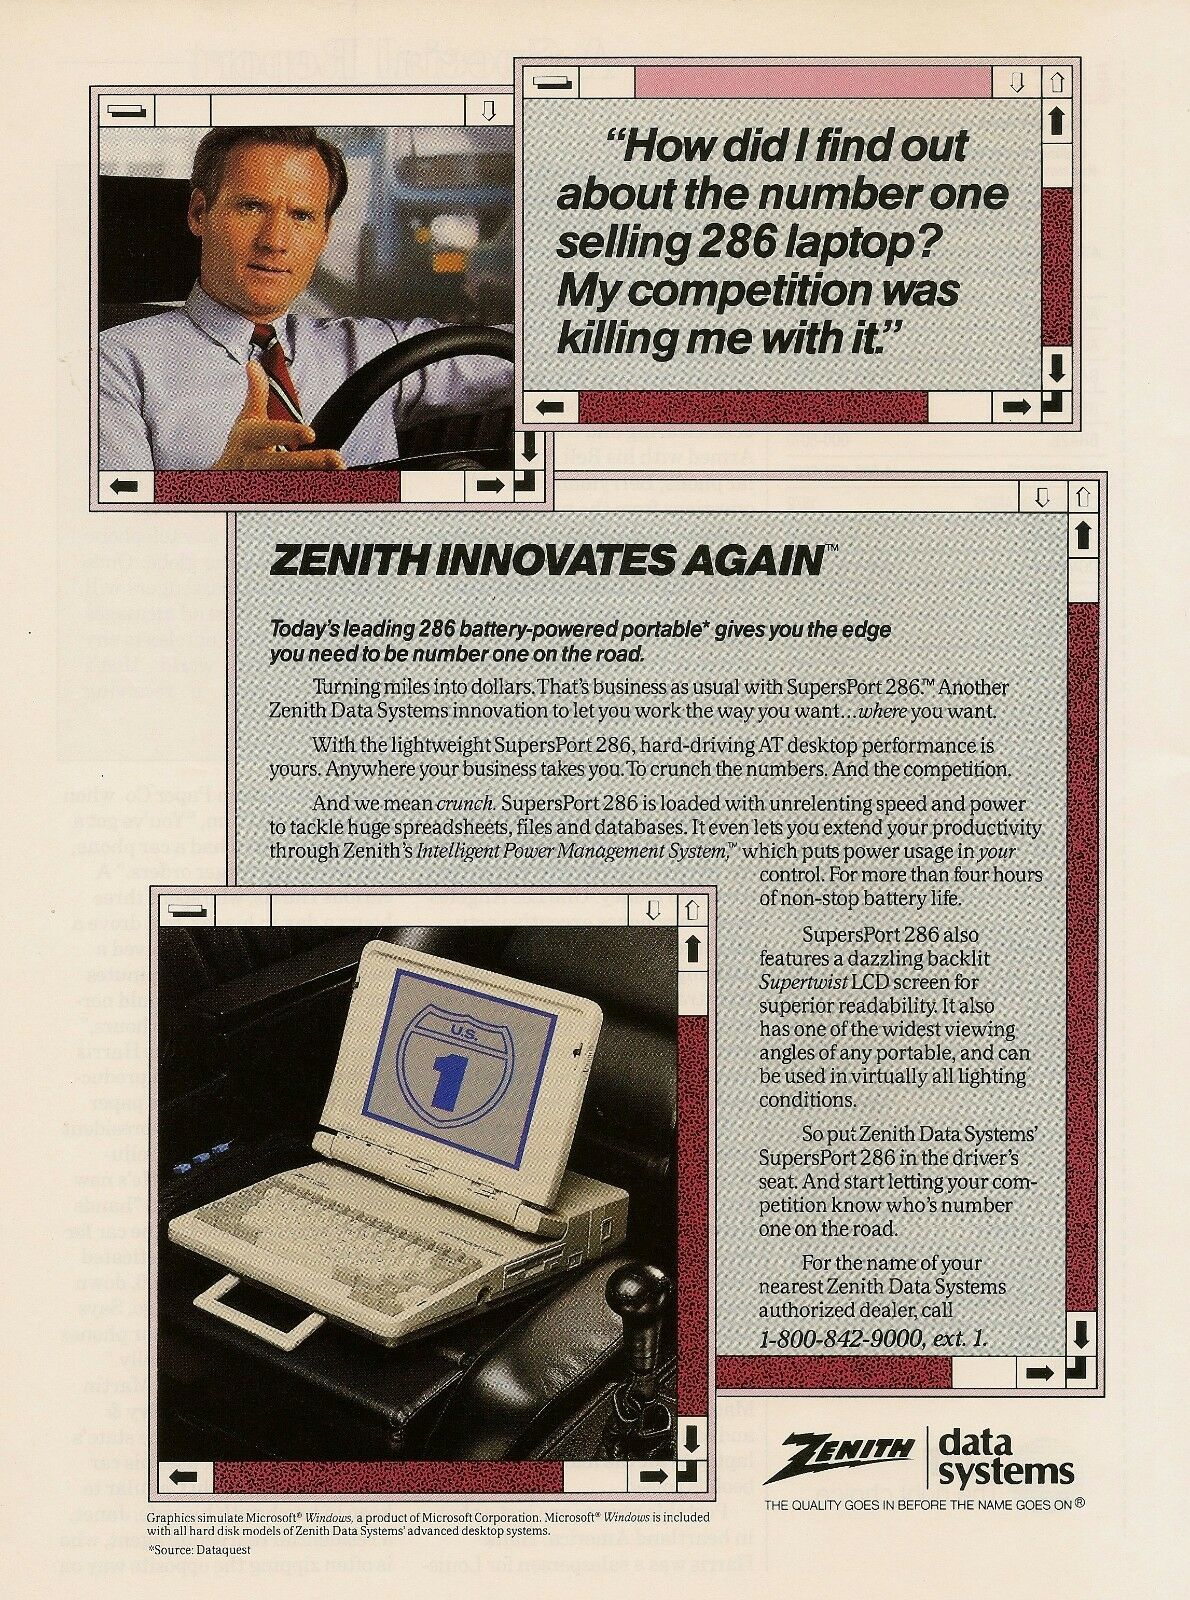 1989 Zenith Data Systems Ad Supers Port 286 Laptop Computer Vintage Print Advert